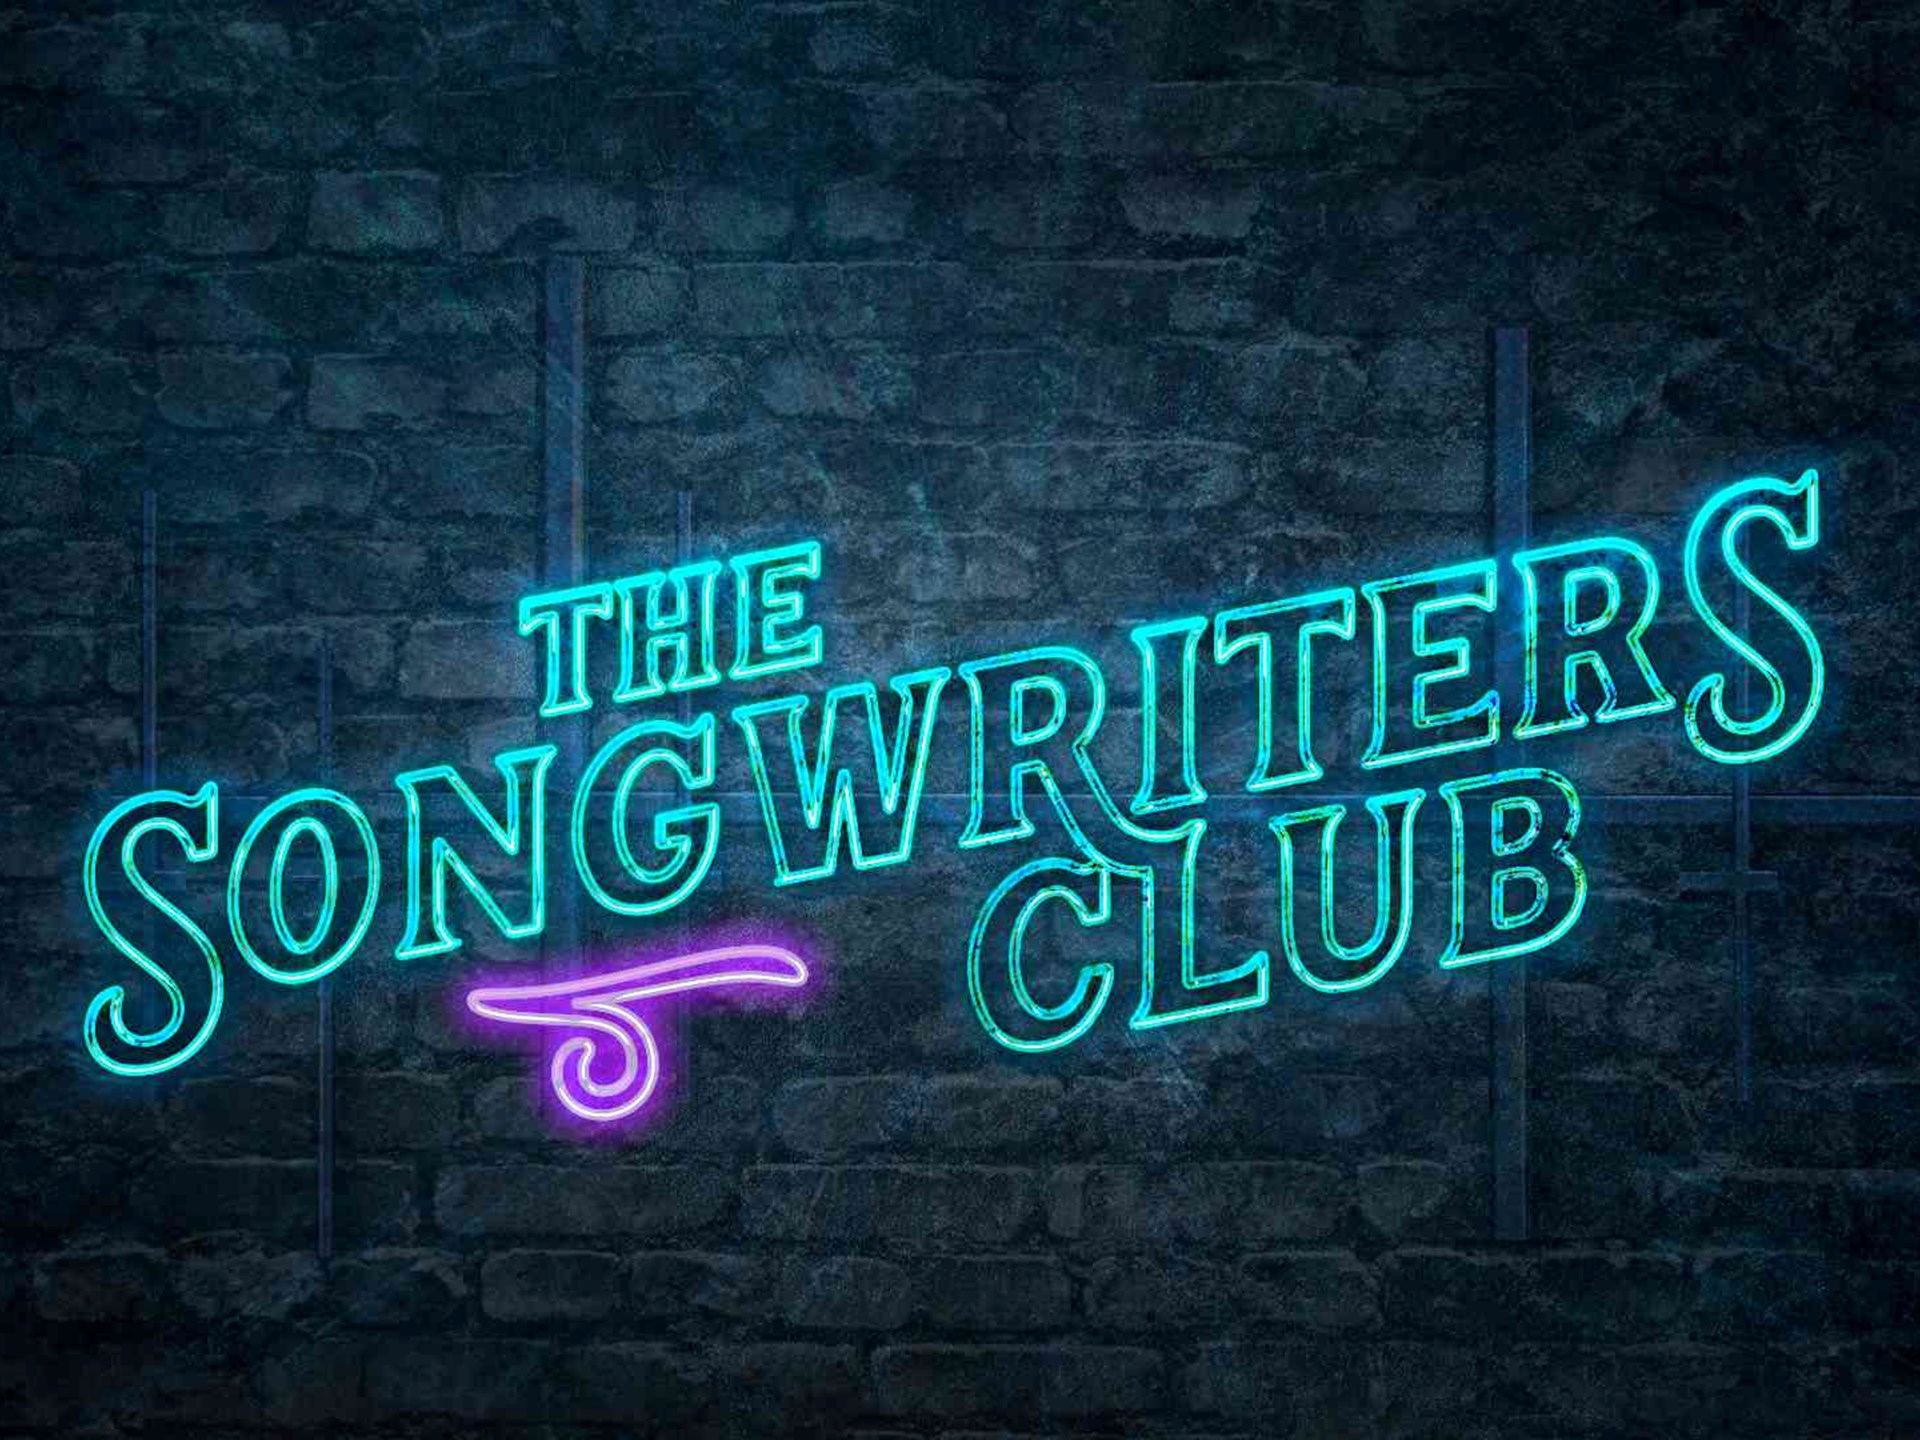 The Songwriters Club